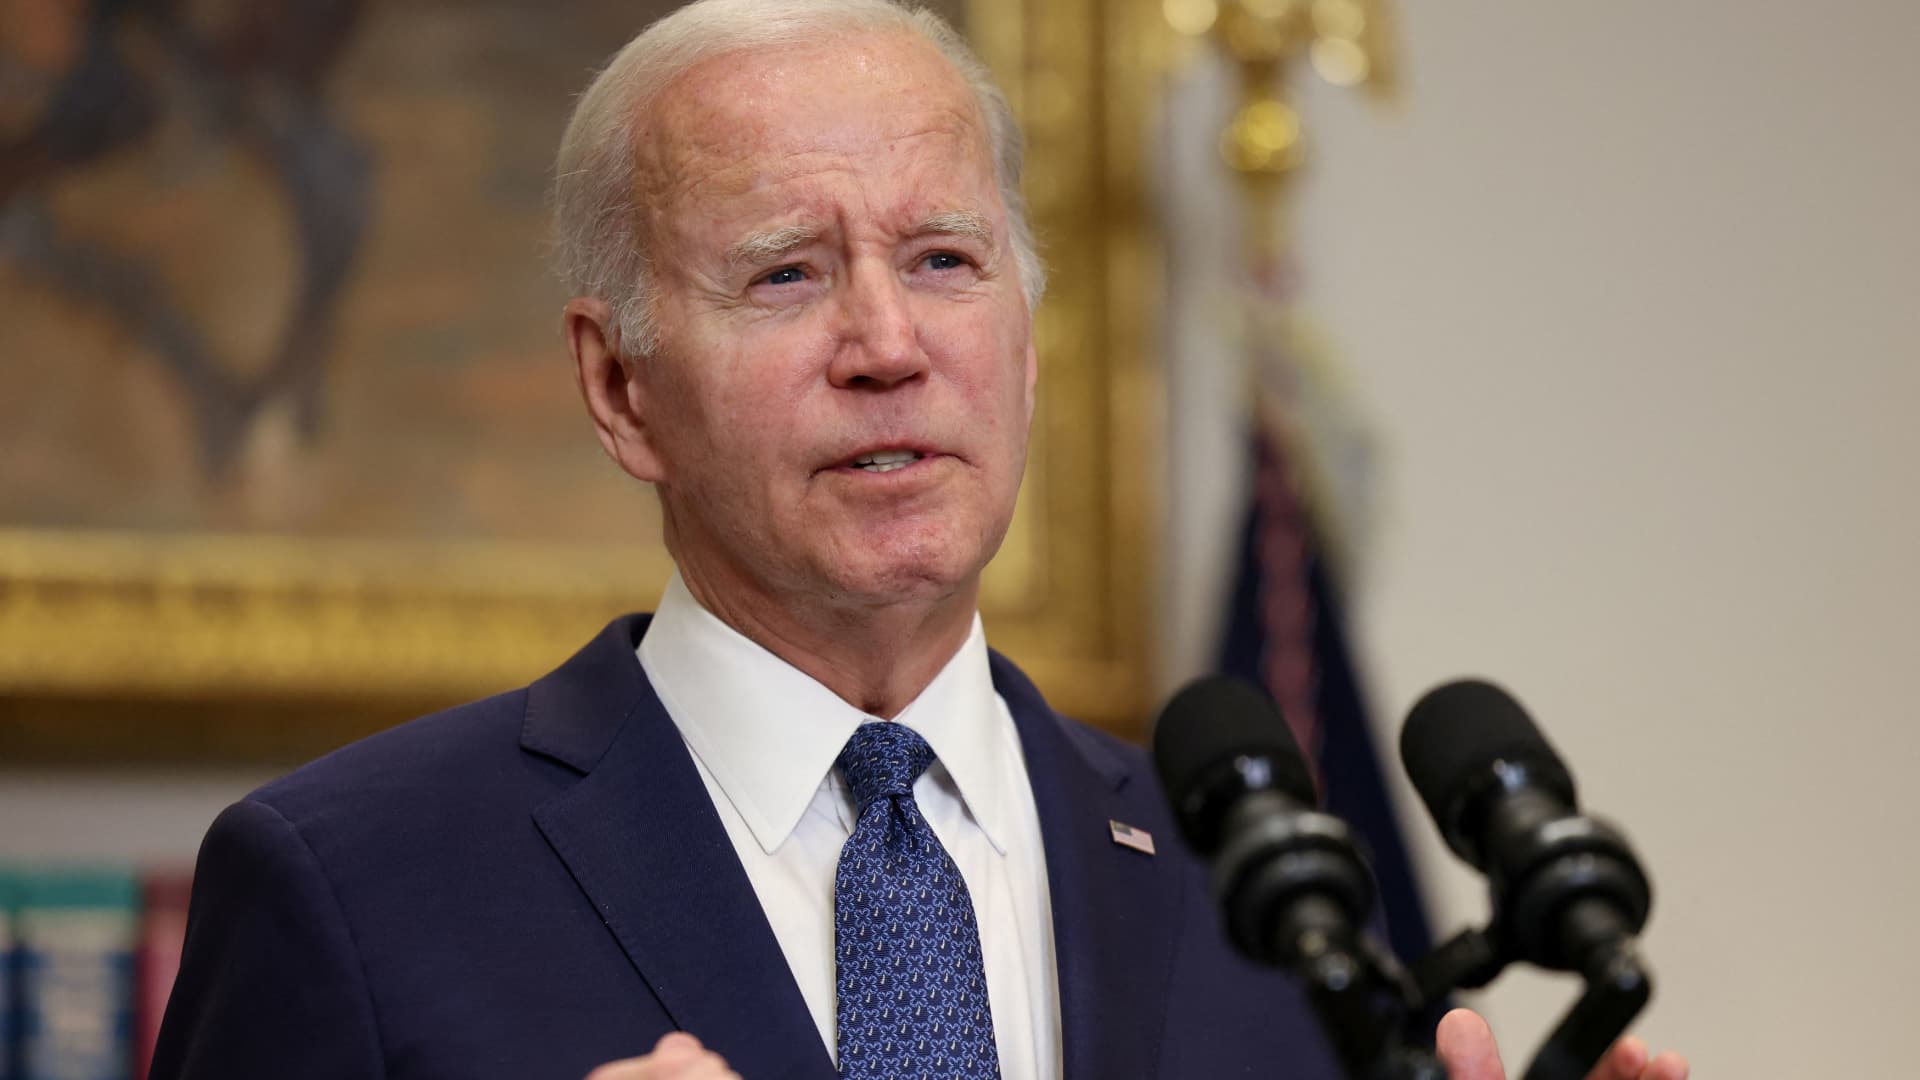 U.S. President Joe Biden speaks on his deal with House Speaker Kevin McCarthy (R-CA) to raise the United States' debt ceiling at the White House in Washington, May 28, 2023.